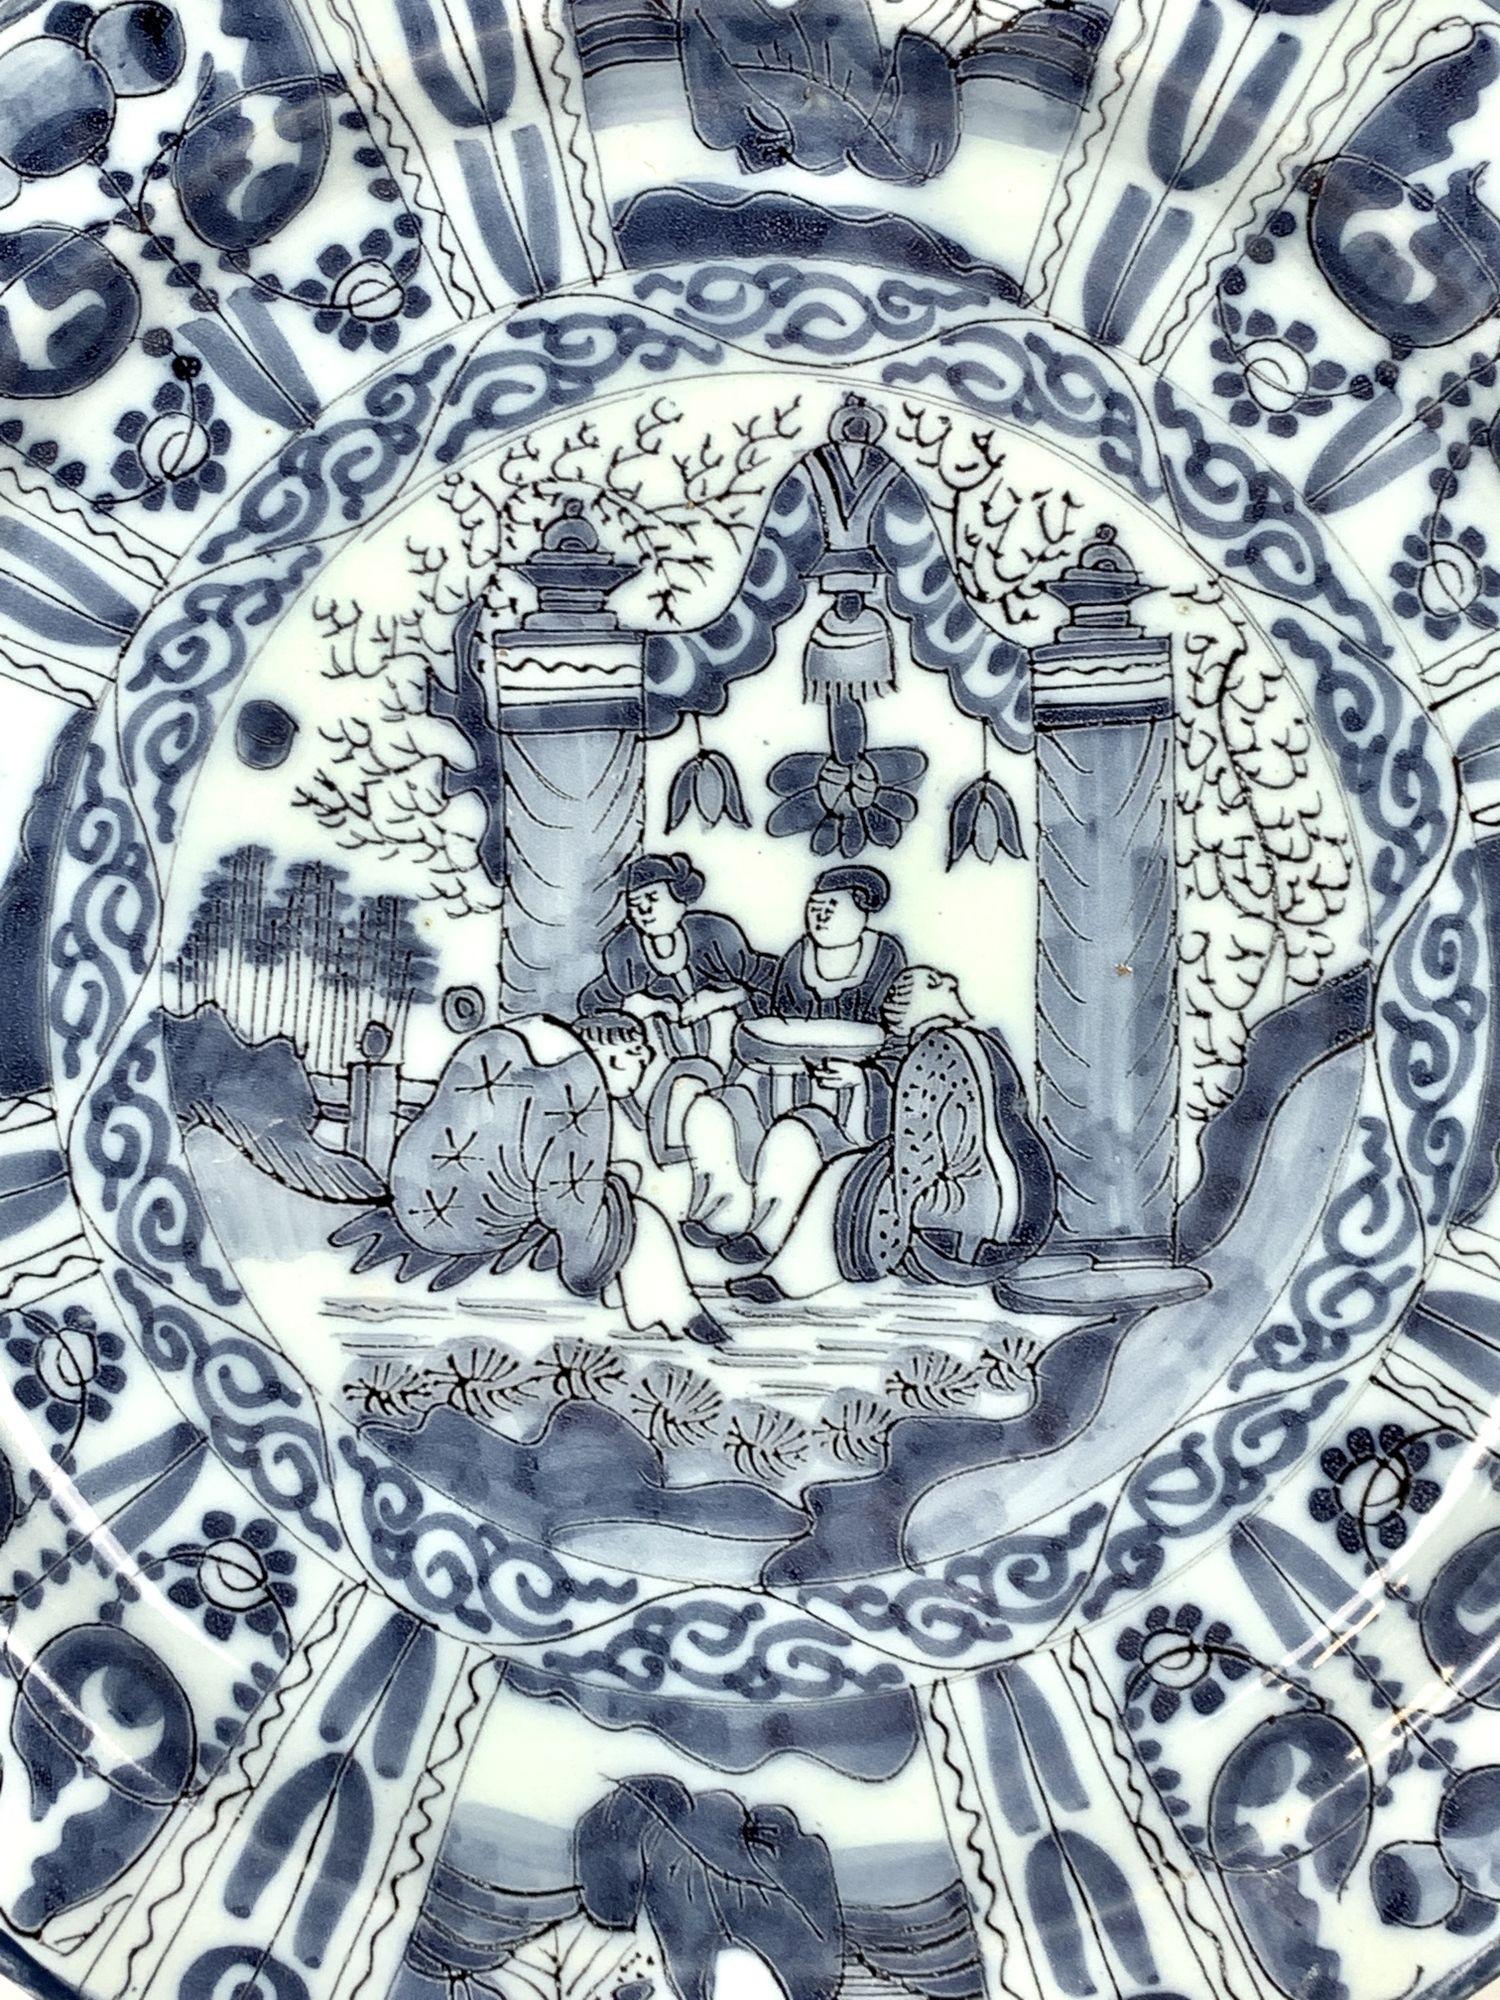 Made in the Netherlands in the late 17th century circa 1690, this extraordinary Delft charger is hand-painted in shades of cobalt blue.
The fascinating decoration is styled after Chinese Kraak porcelains made for export to Europe beginning in the